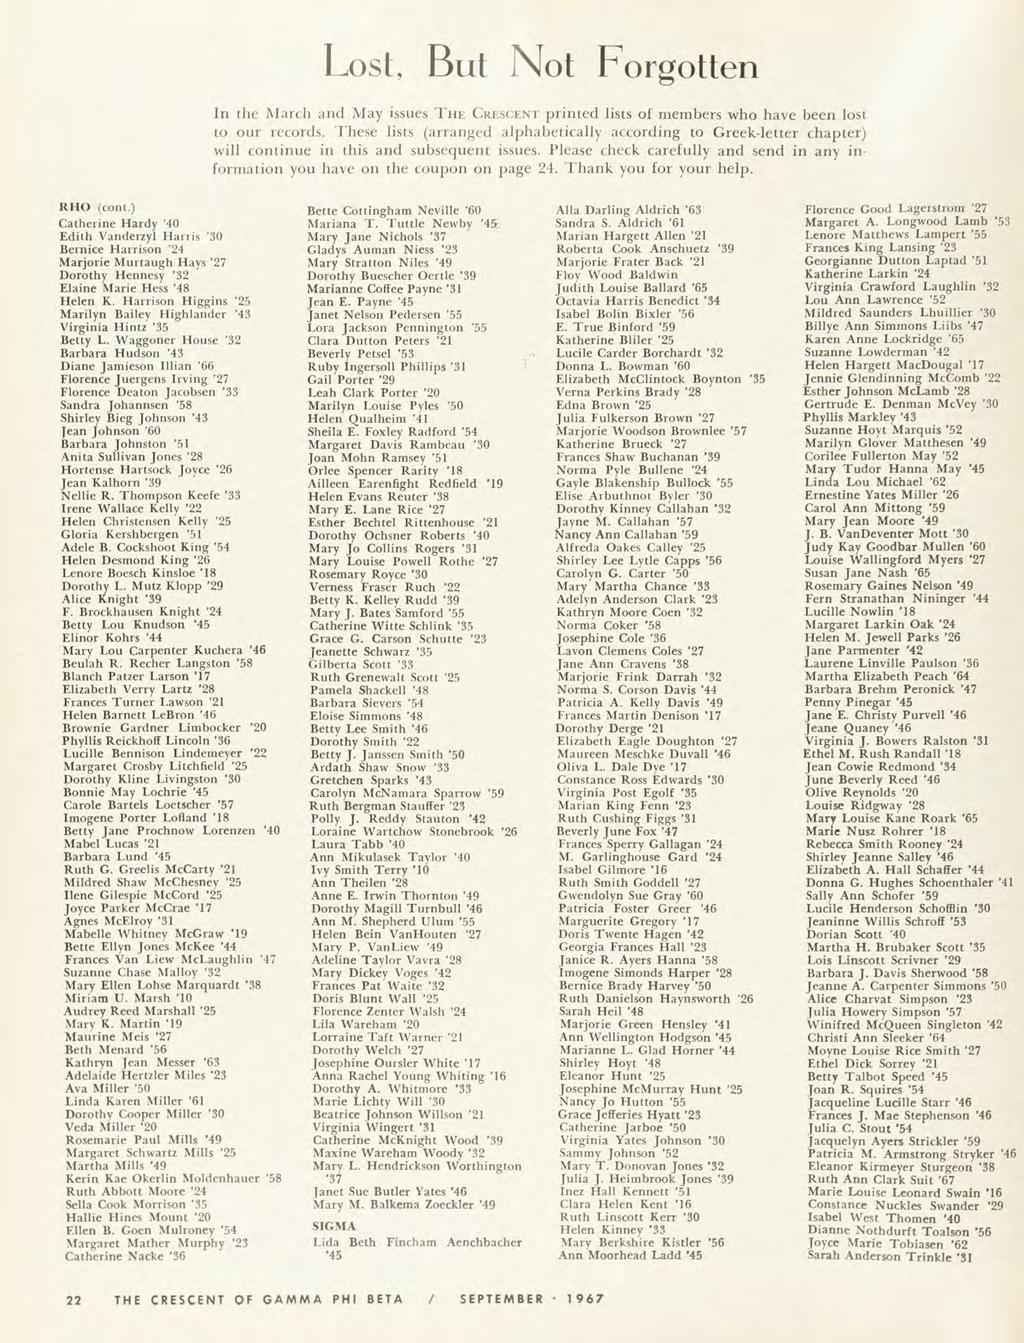 Lost, But Not Forgotten In the March and May issues The Crescent printed lists of members who have been lost to our records.